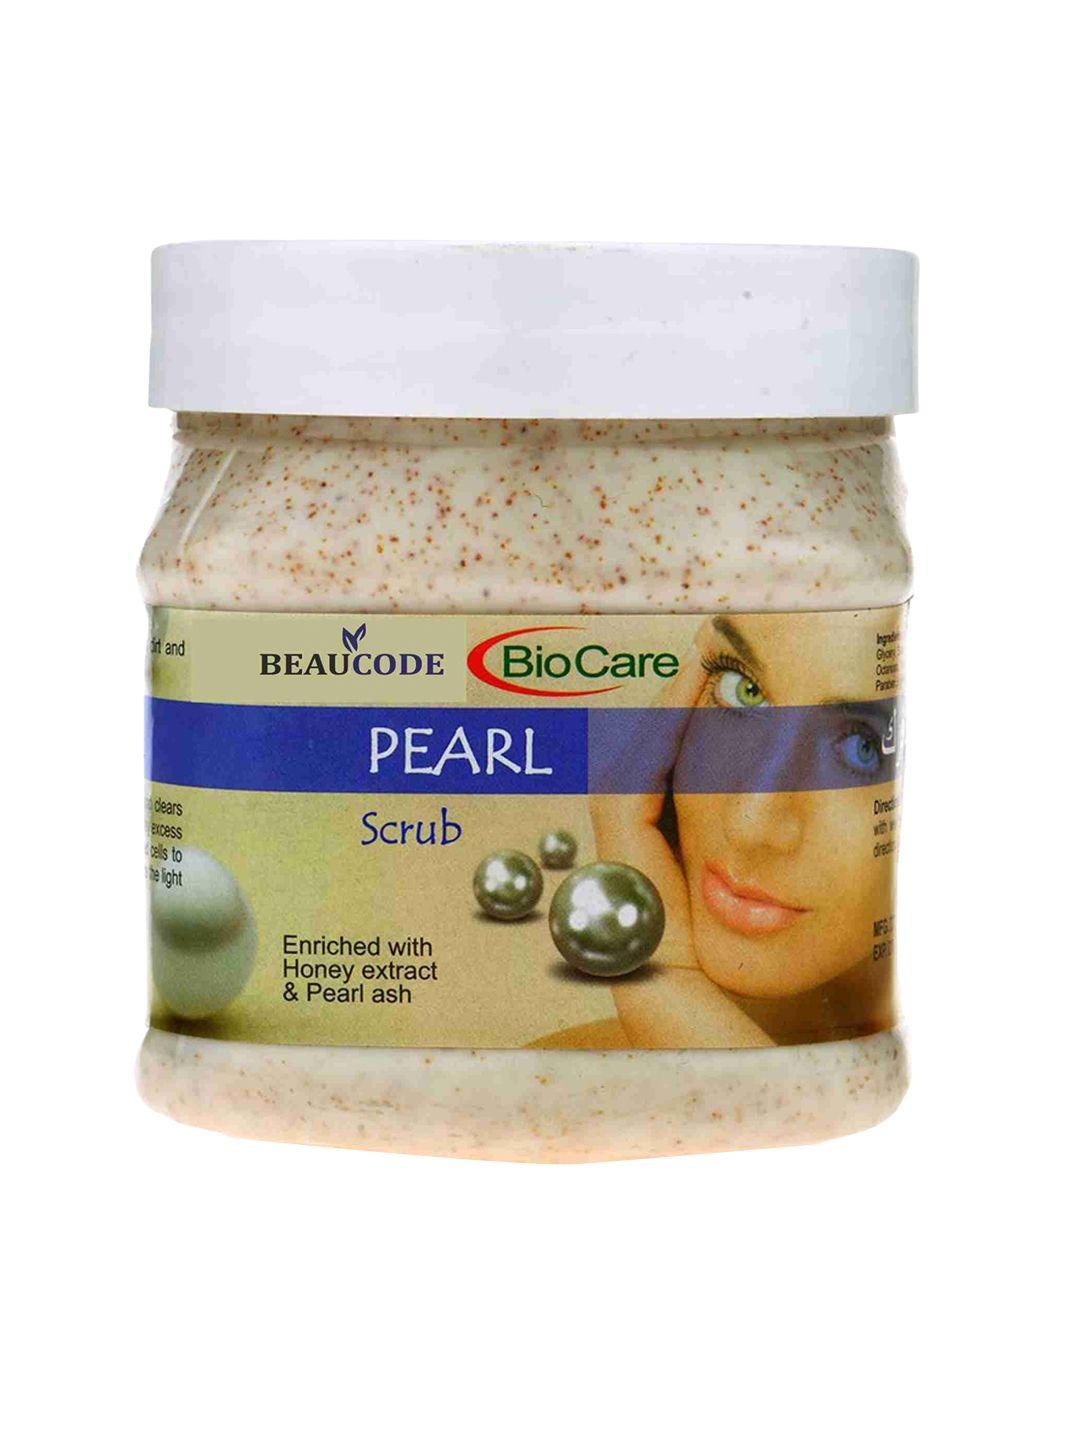 beaucode biocare pearl face scrub with honey extract & pearl ash - 250ml